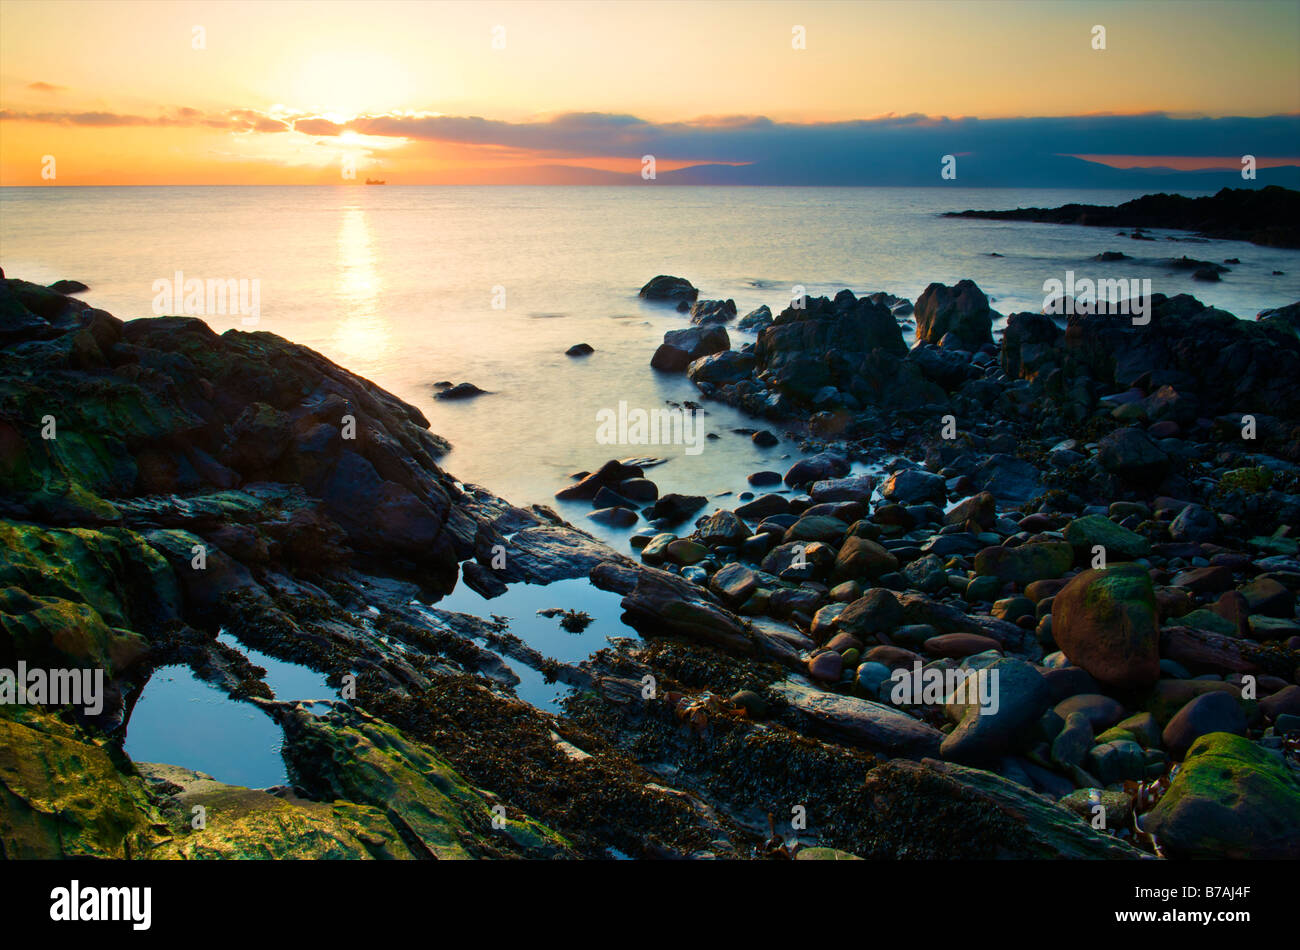 seascape view of the river clyde at sunset over a rocky outcrop at low tide Stock Photo